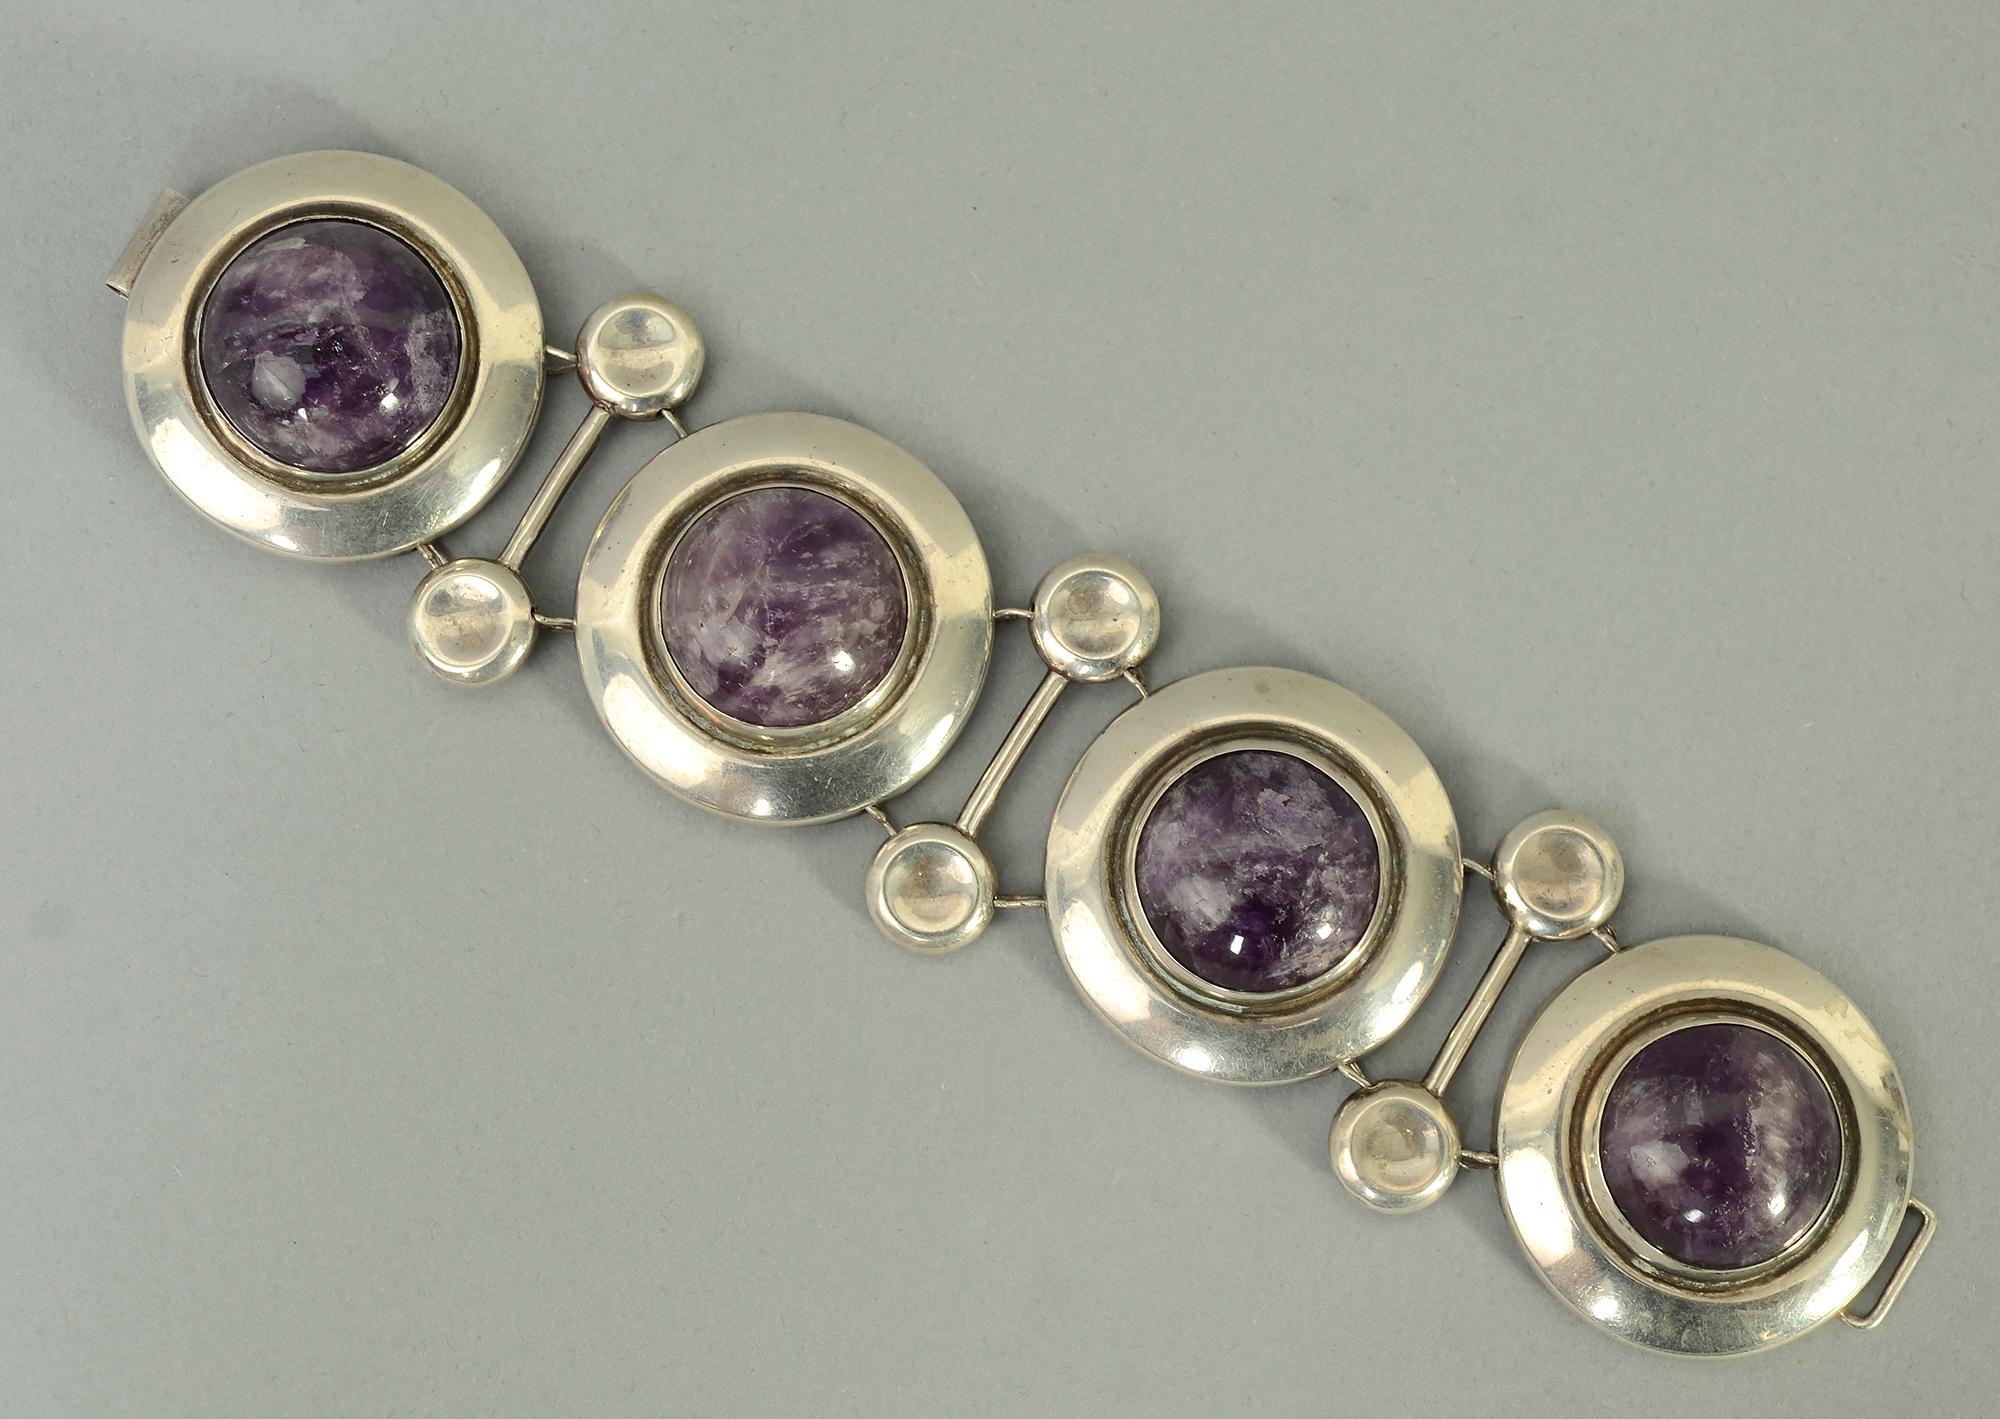 This dramatic bracelet by Frederick Davis (1880 - 1961) is as unusual as it is beautiful.
The bracelet consists of four silver discs in which are set cabochon amethysts. The links are separated by silver bars, the ends of which repeat the circle